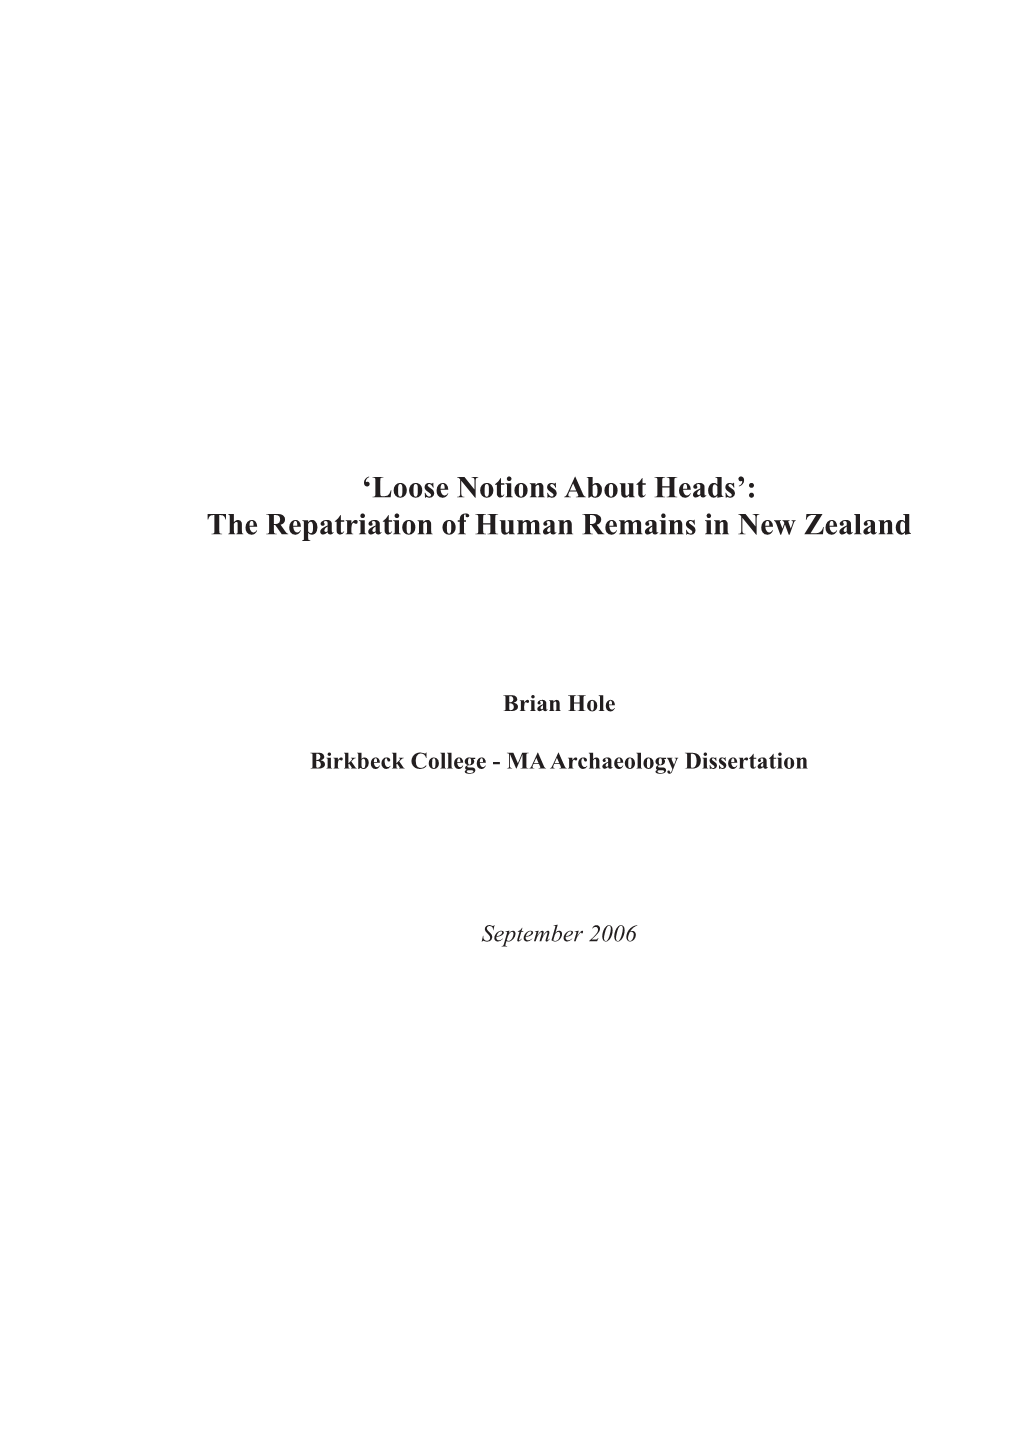 The Repatriation of Human Remains in New Zealand